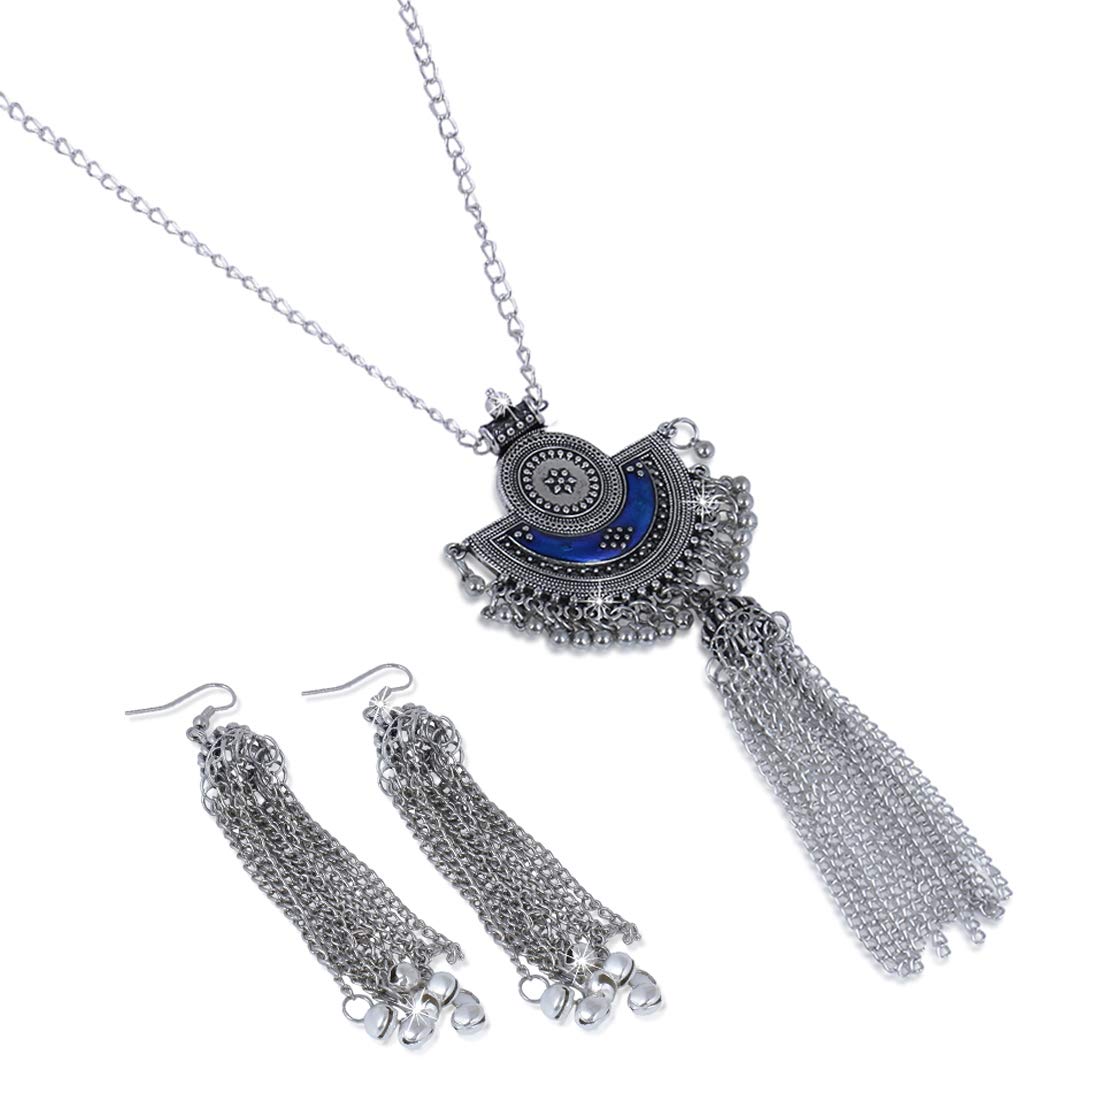 Yellow Chimes Stylish Crafted Royal Blue Meenakari Oxidized Silver Necklace Set with Earrings Oxidized Jewellery Sets for Women and Girls